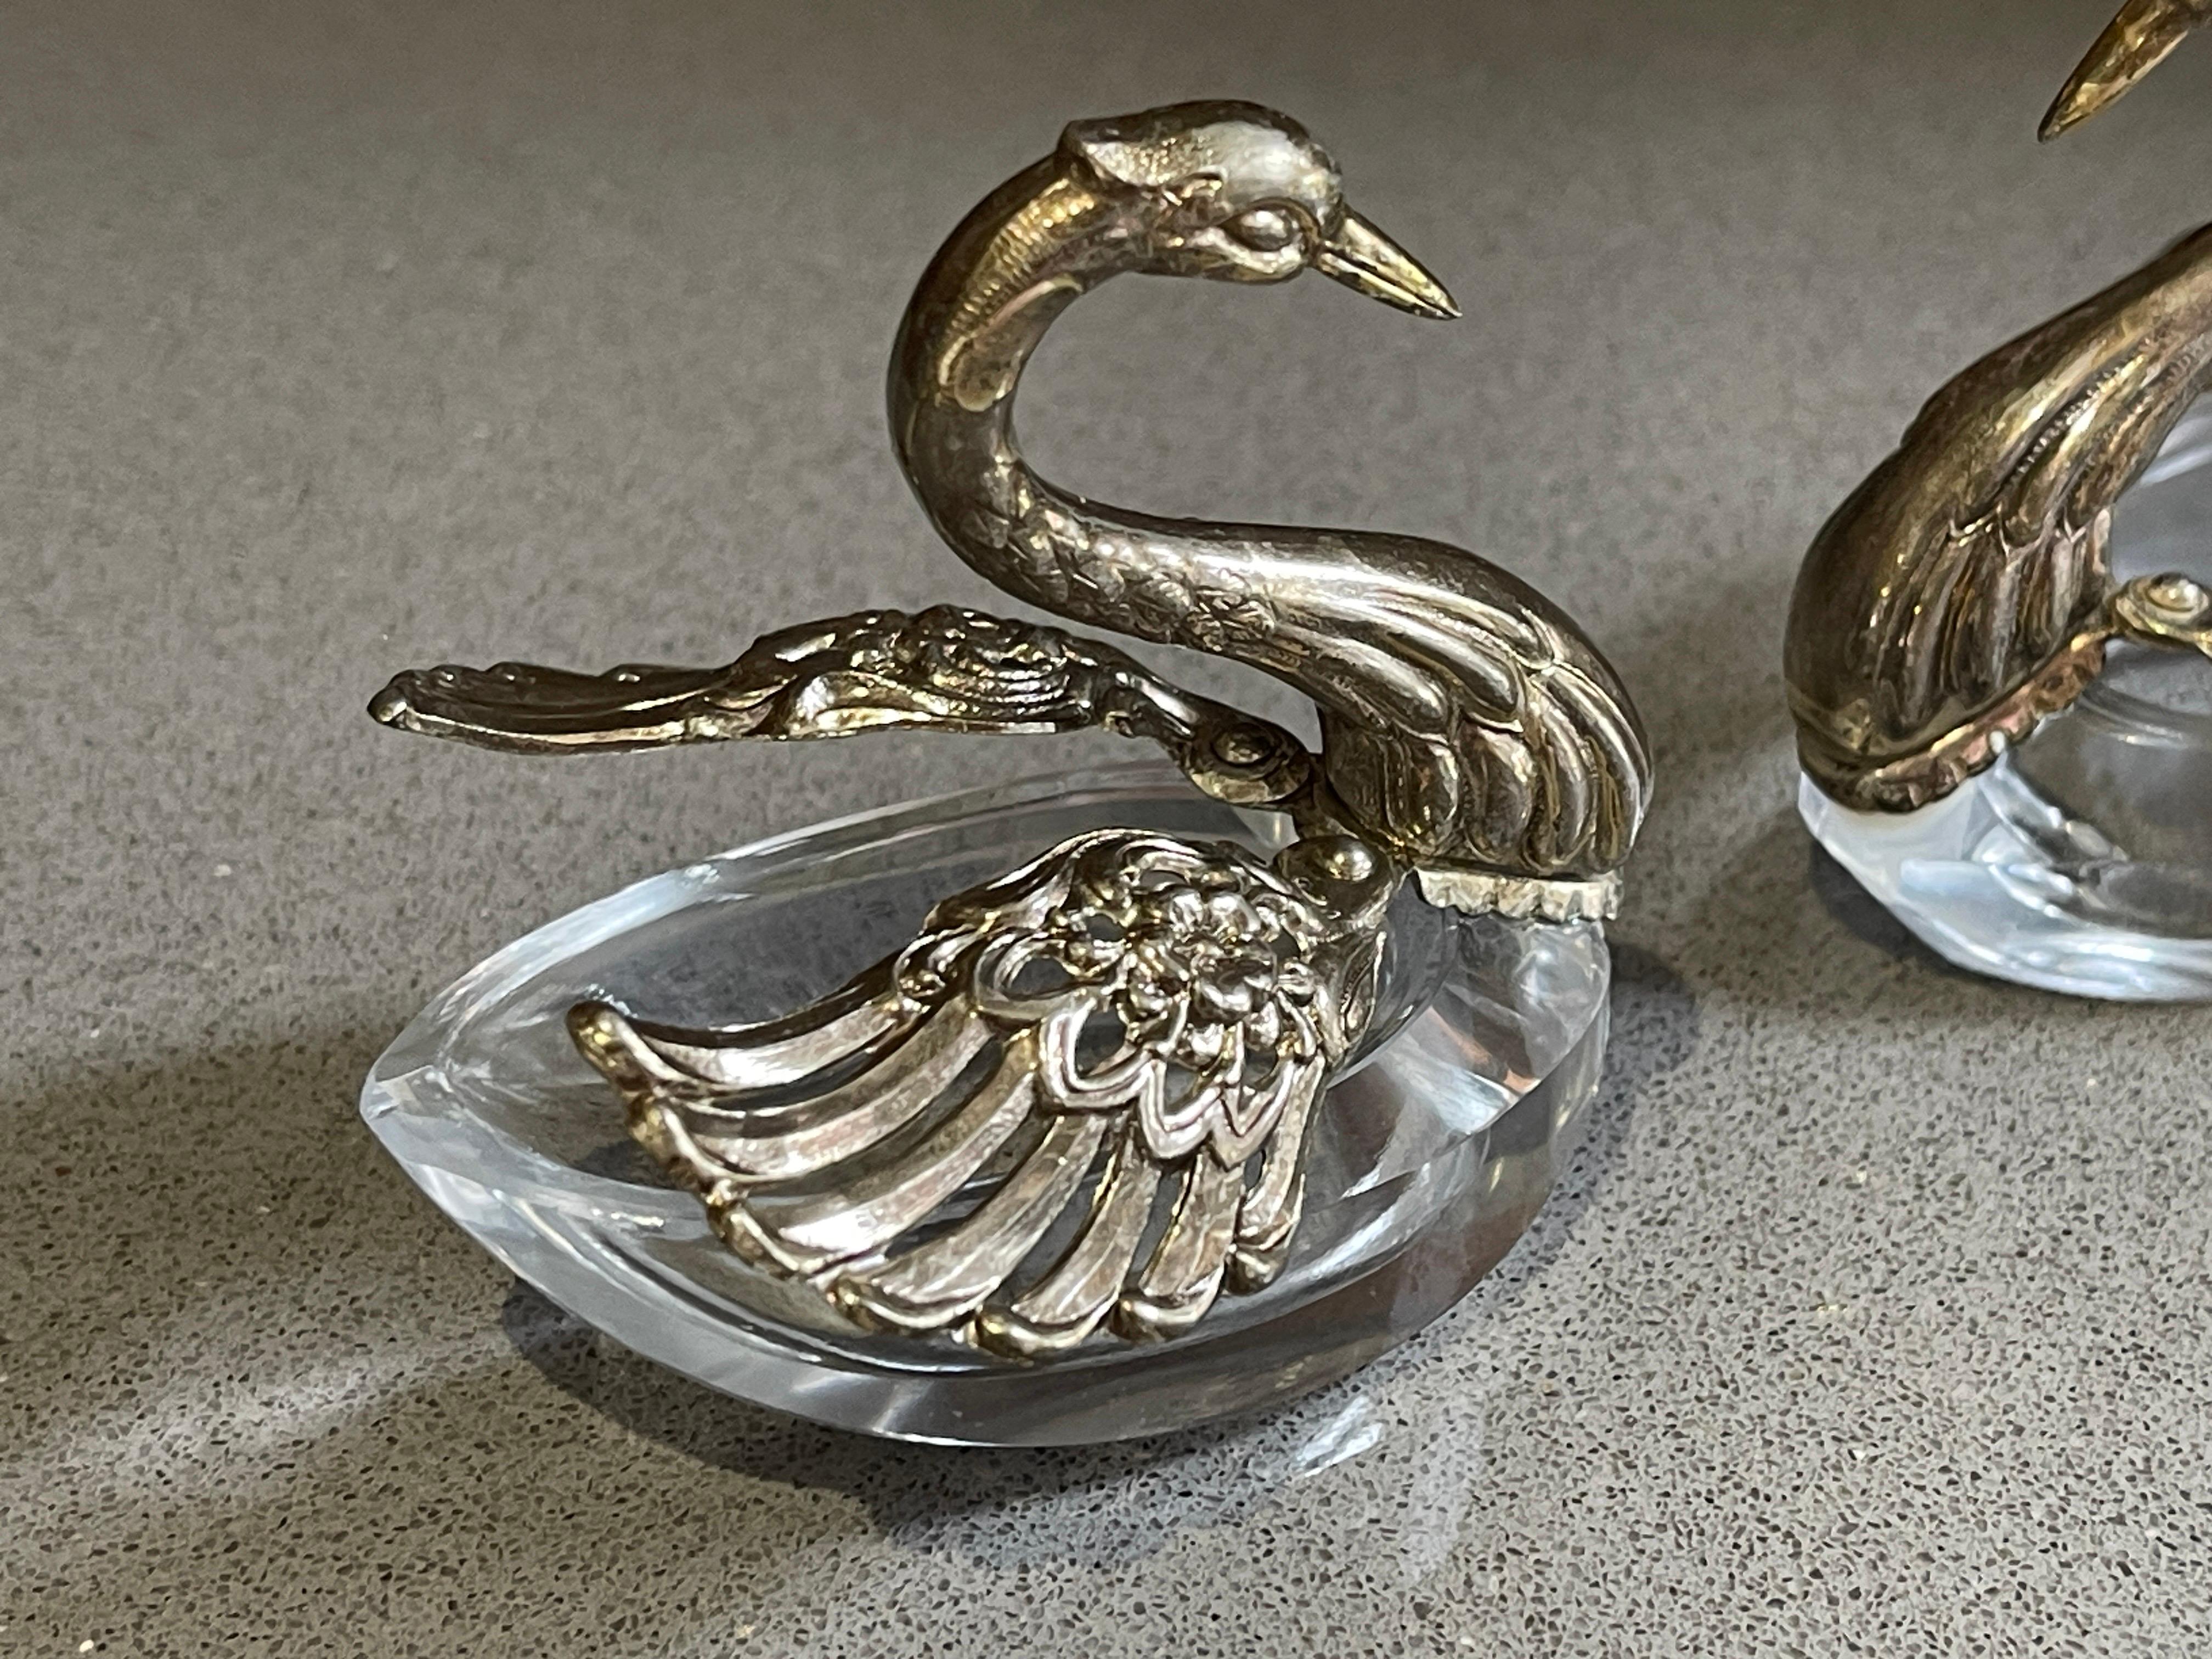 Silver Swan Vintage Salt and Pepper, Set of 2 w/ Moving Wings.
Antique valuable silver salt and pepper shaker or Decorative tableware pressed, cast and chased pair of swann. Oval, domed body on short, curve  All-encompassing C-curves in relief,